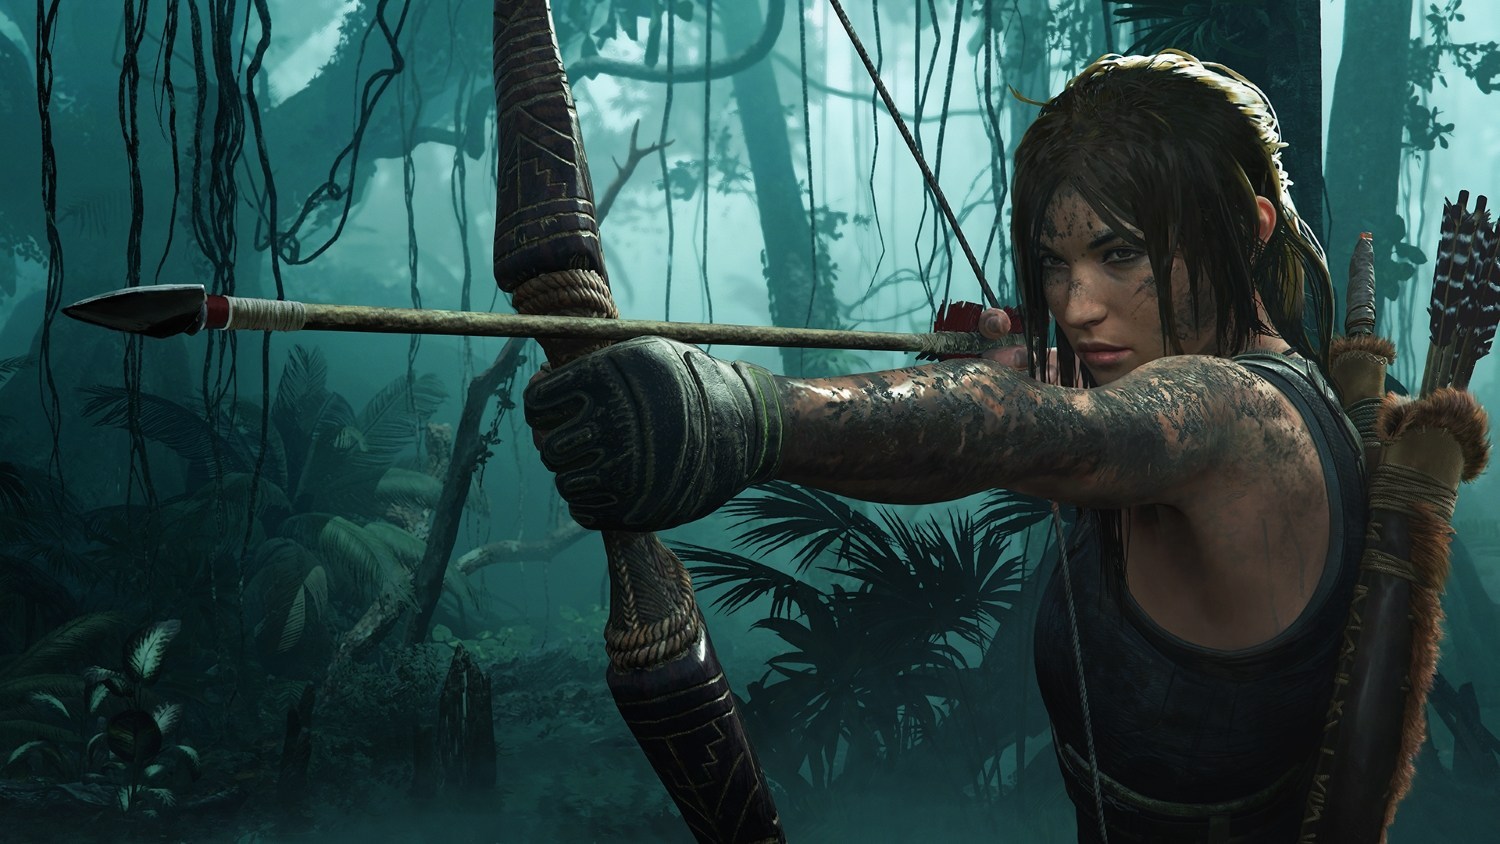 Fortnite fans think next crossover character is Lara Croft